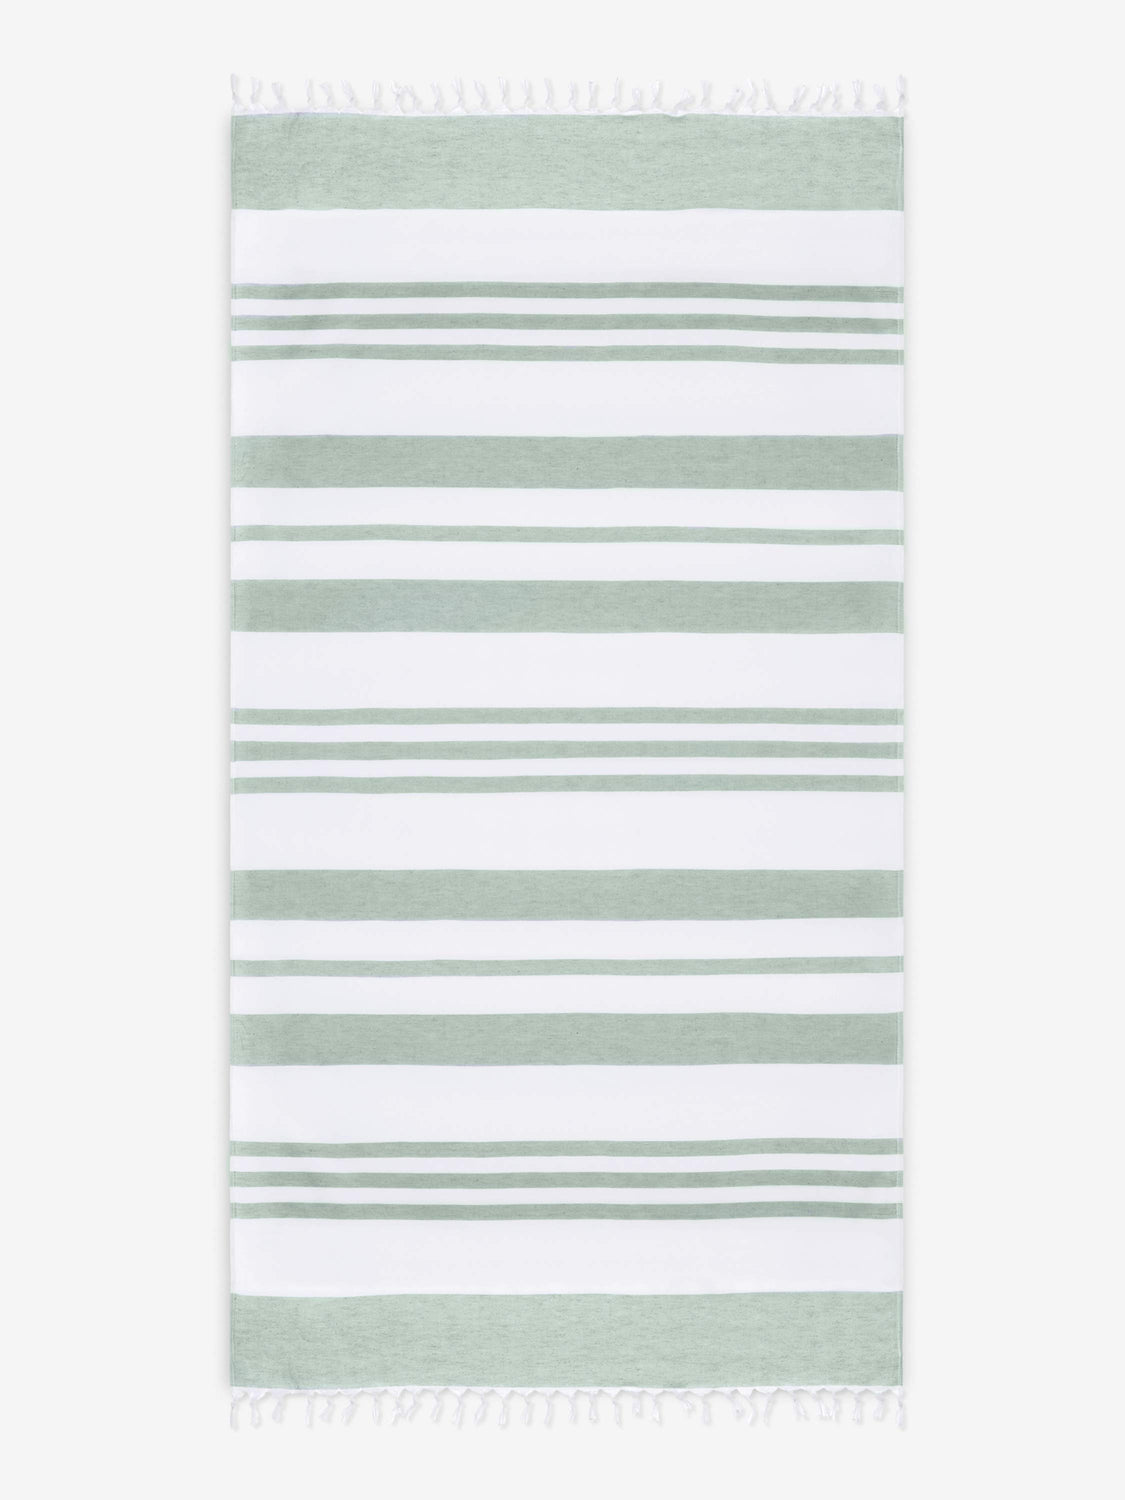 An oversized, green and white striped Turkish cotton towel with white fringe laid out. 